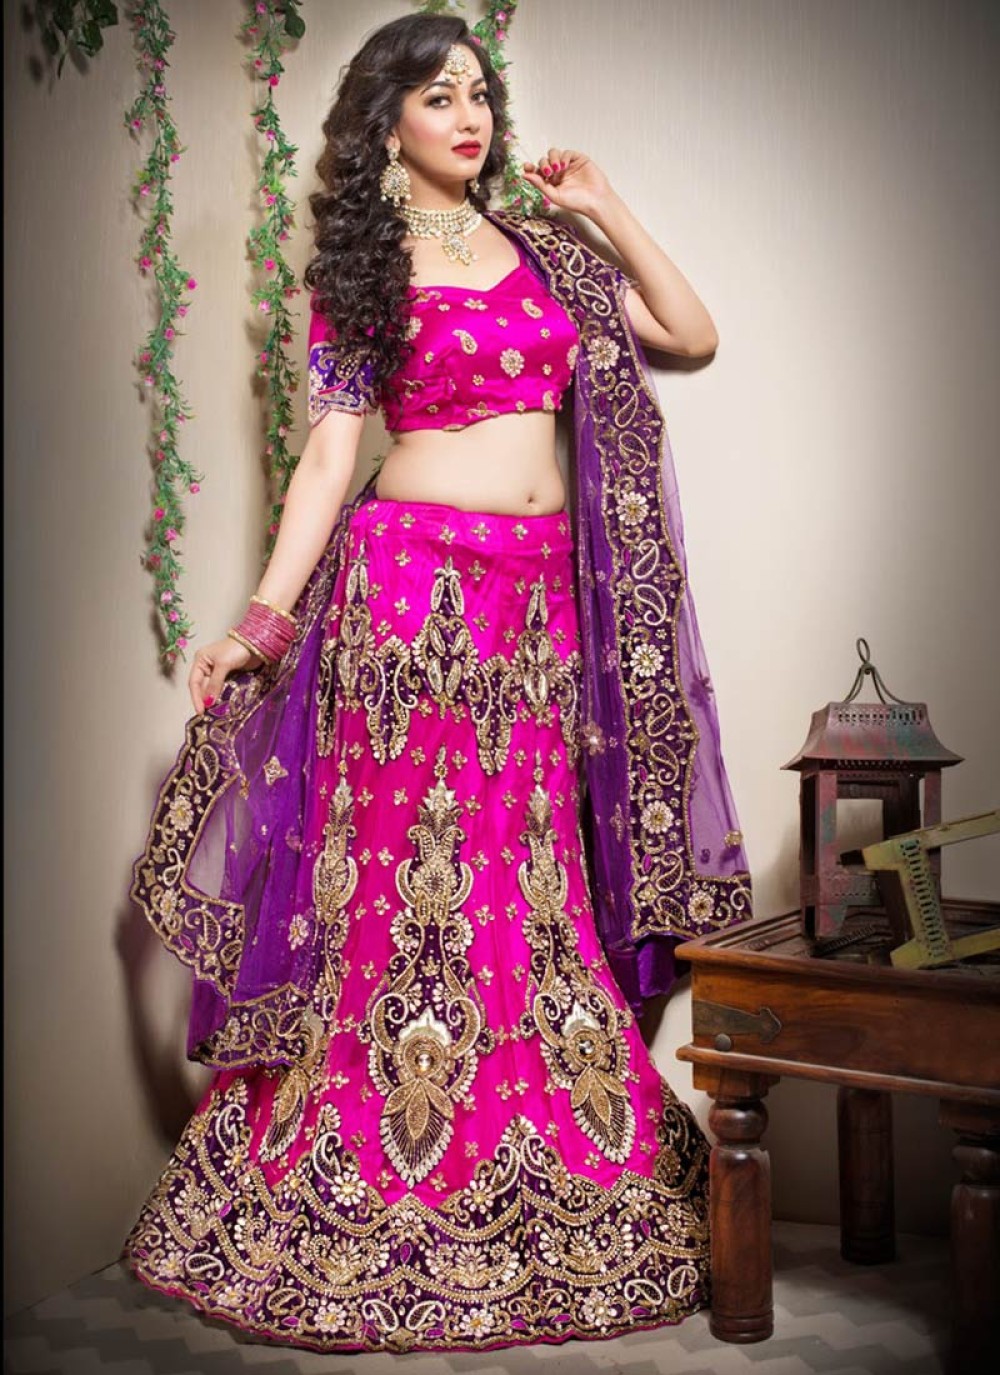 Buy Pink Beauty Women's Pink Paisley Design Umbrella Cut Silk Lehenga/Skirt  for Party/Festival Function. at Amazon.in